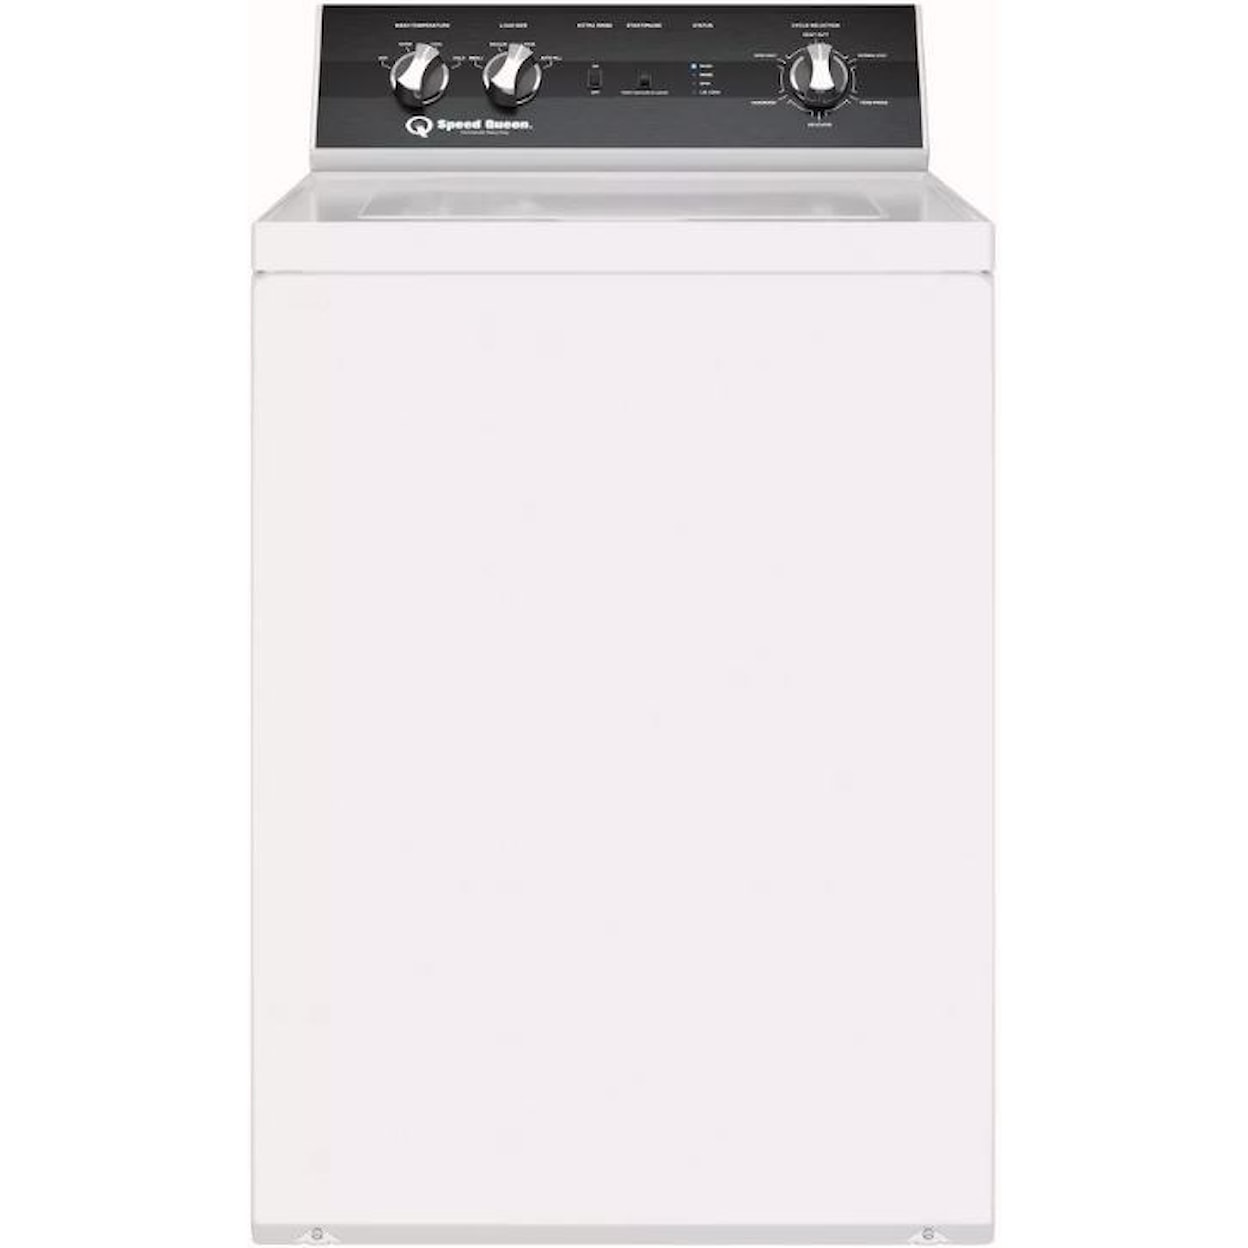 Speed Queen Washers 26" Top Load Washer